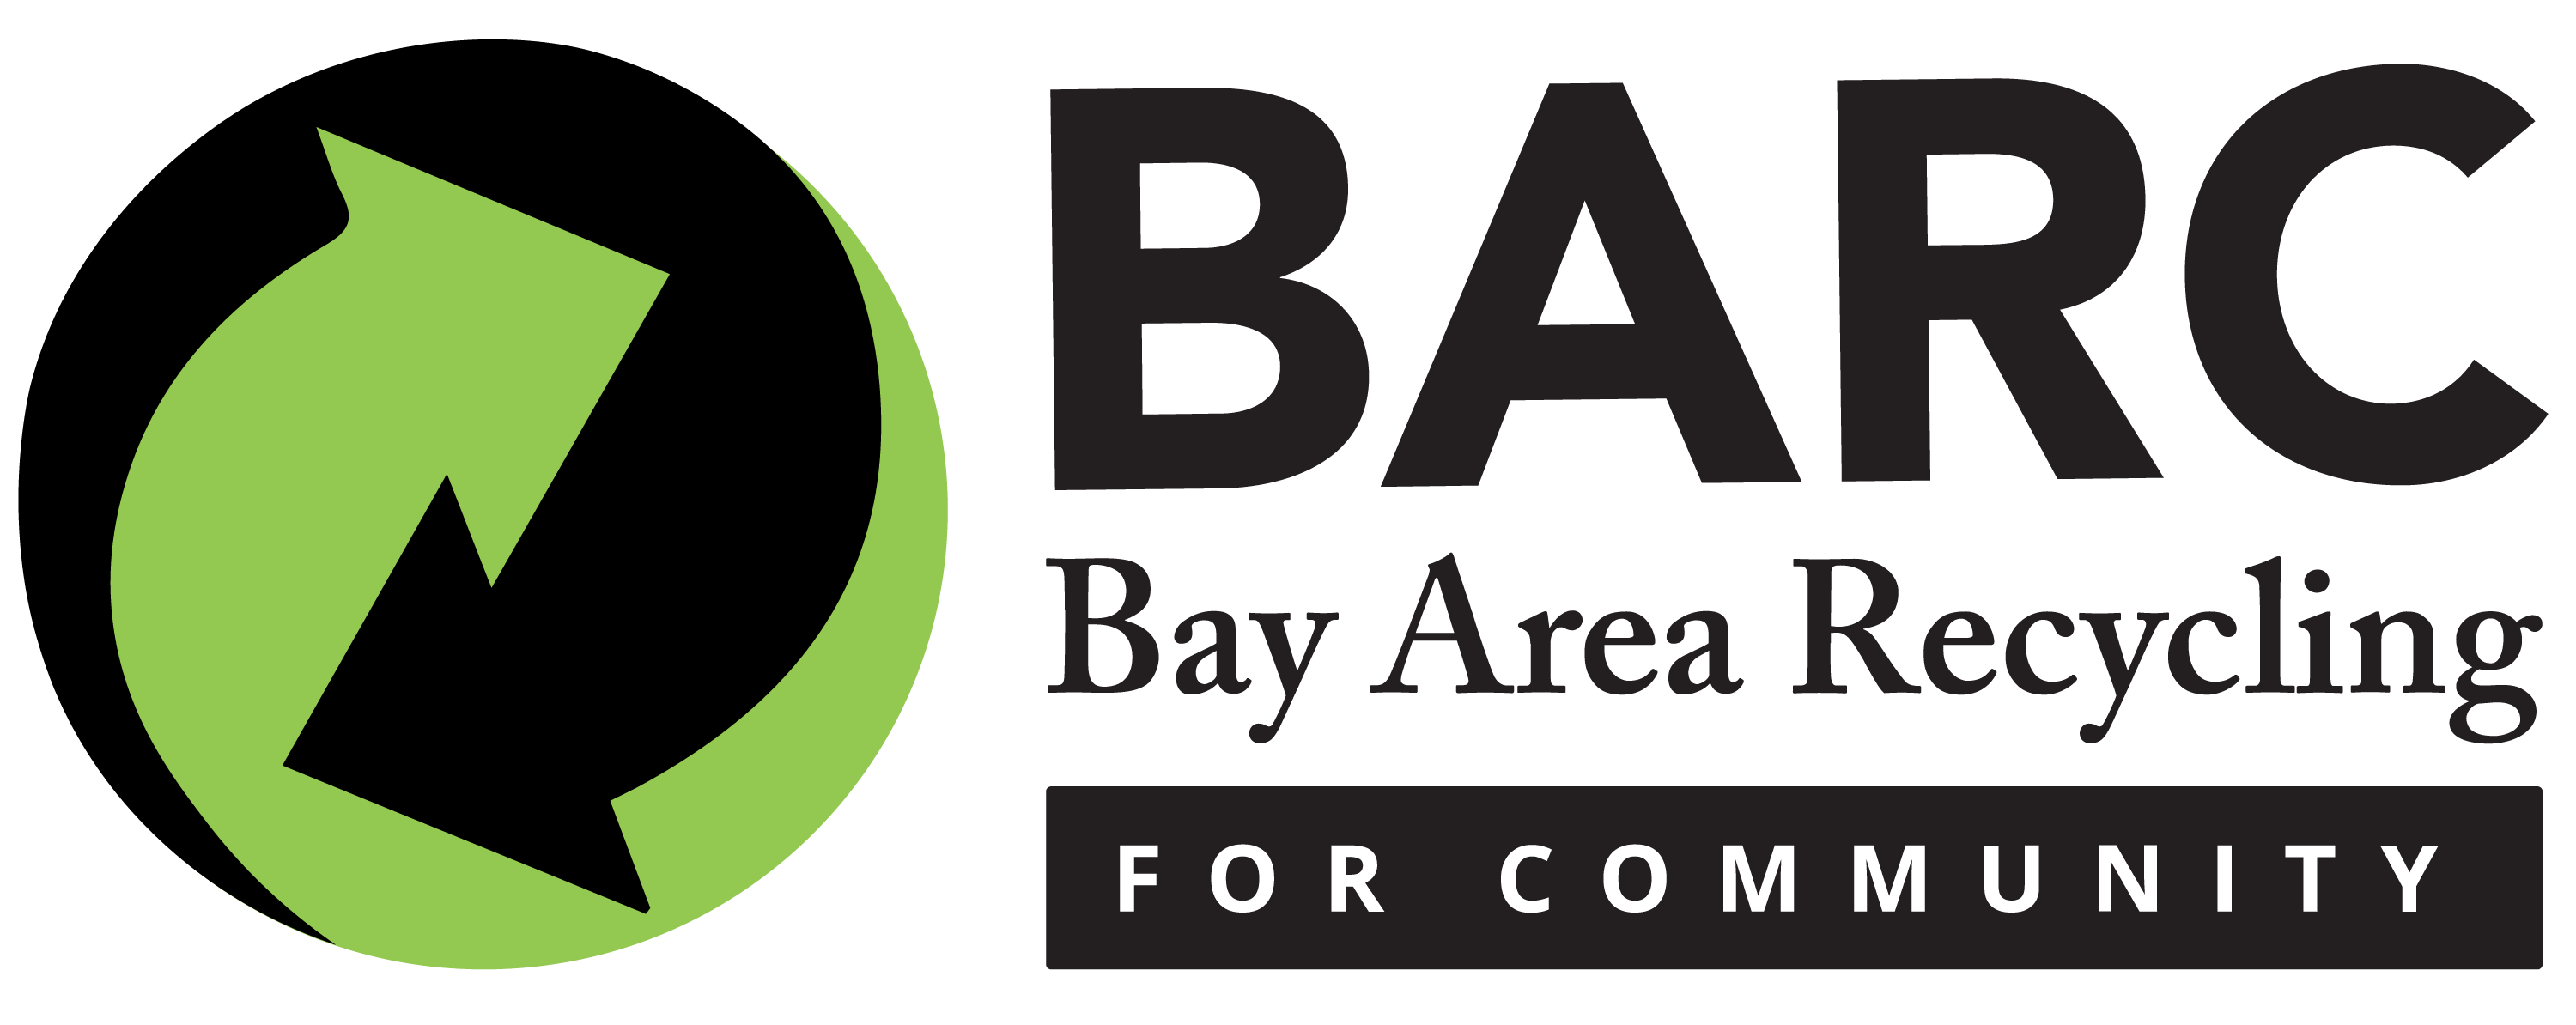 Expert Tips From Bay Area Recycling For Community